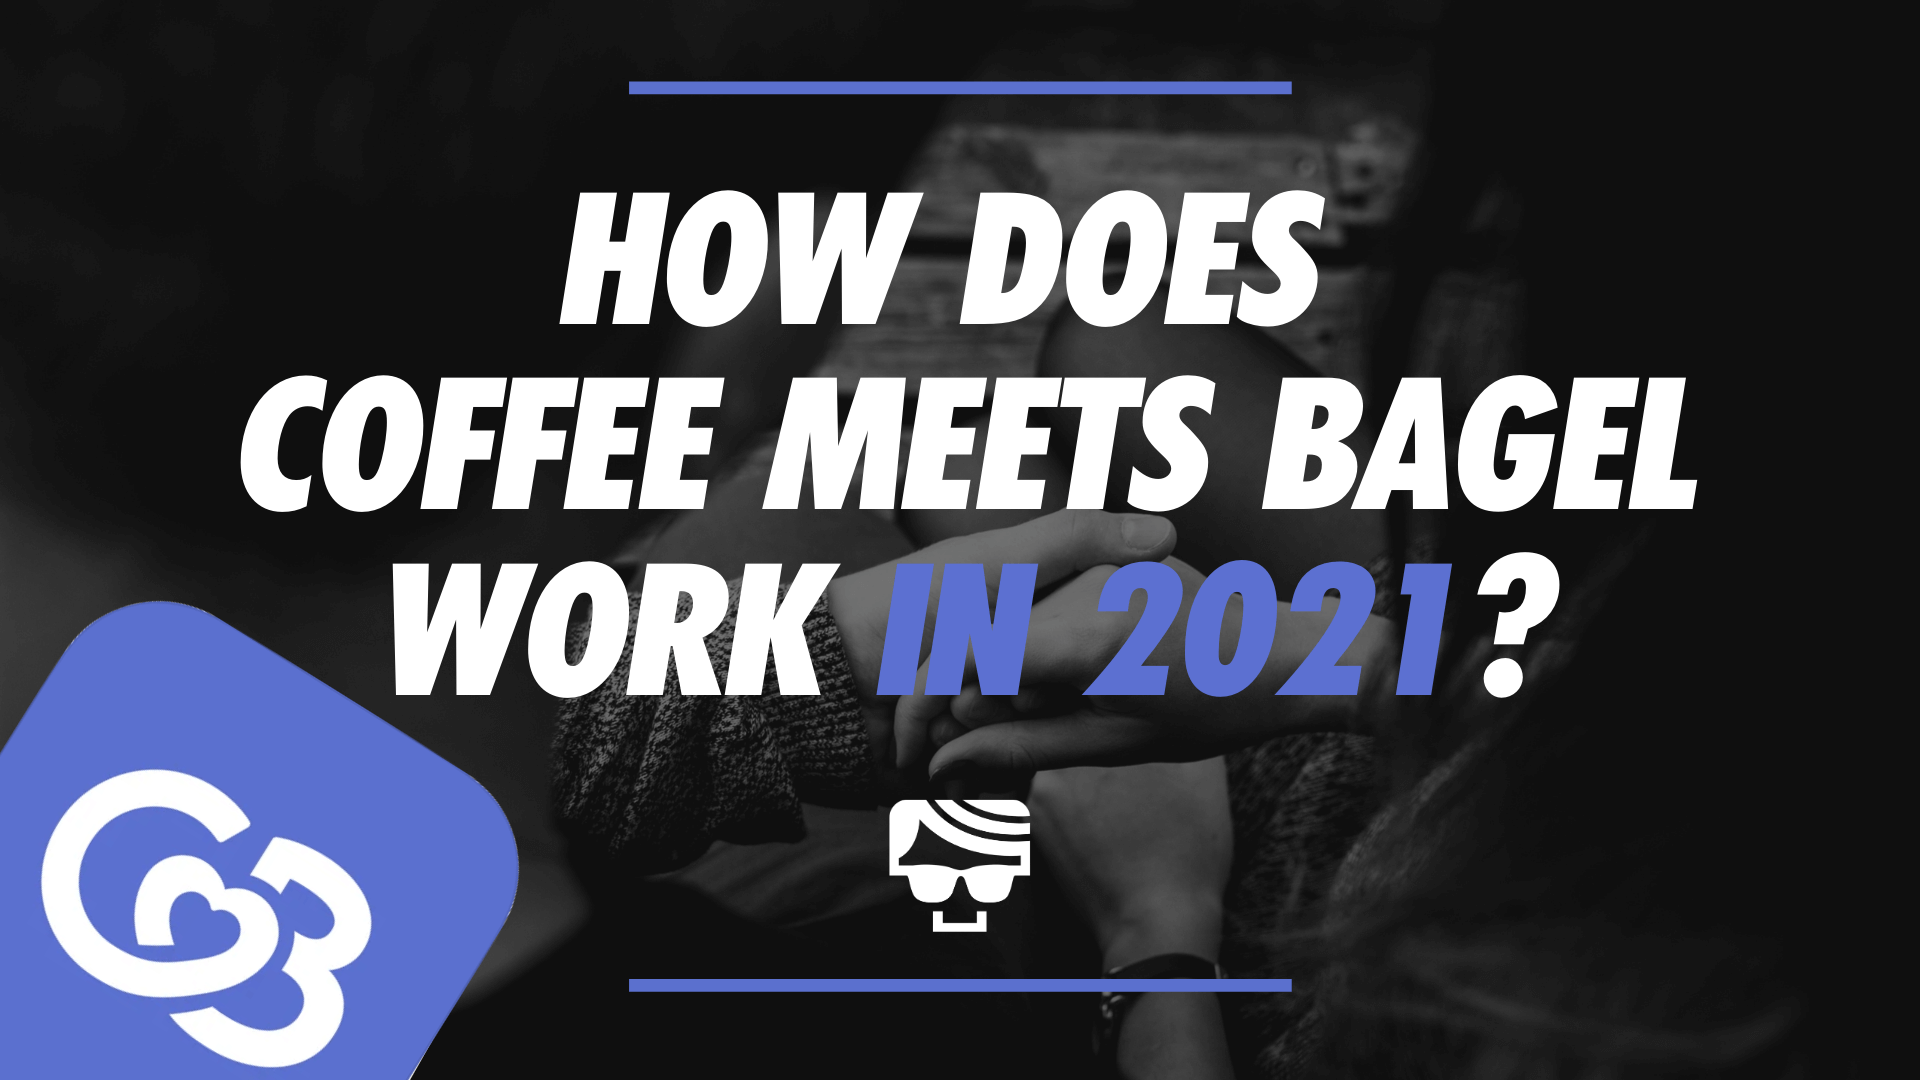 How Does Coffee Meets Bagel Work? Featured Image